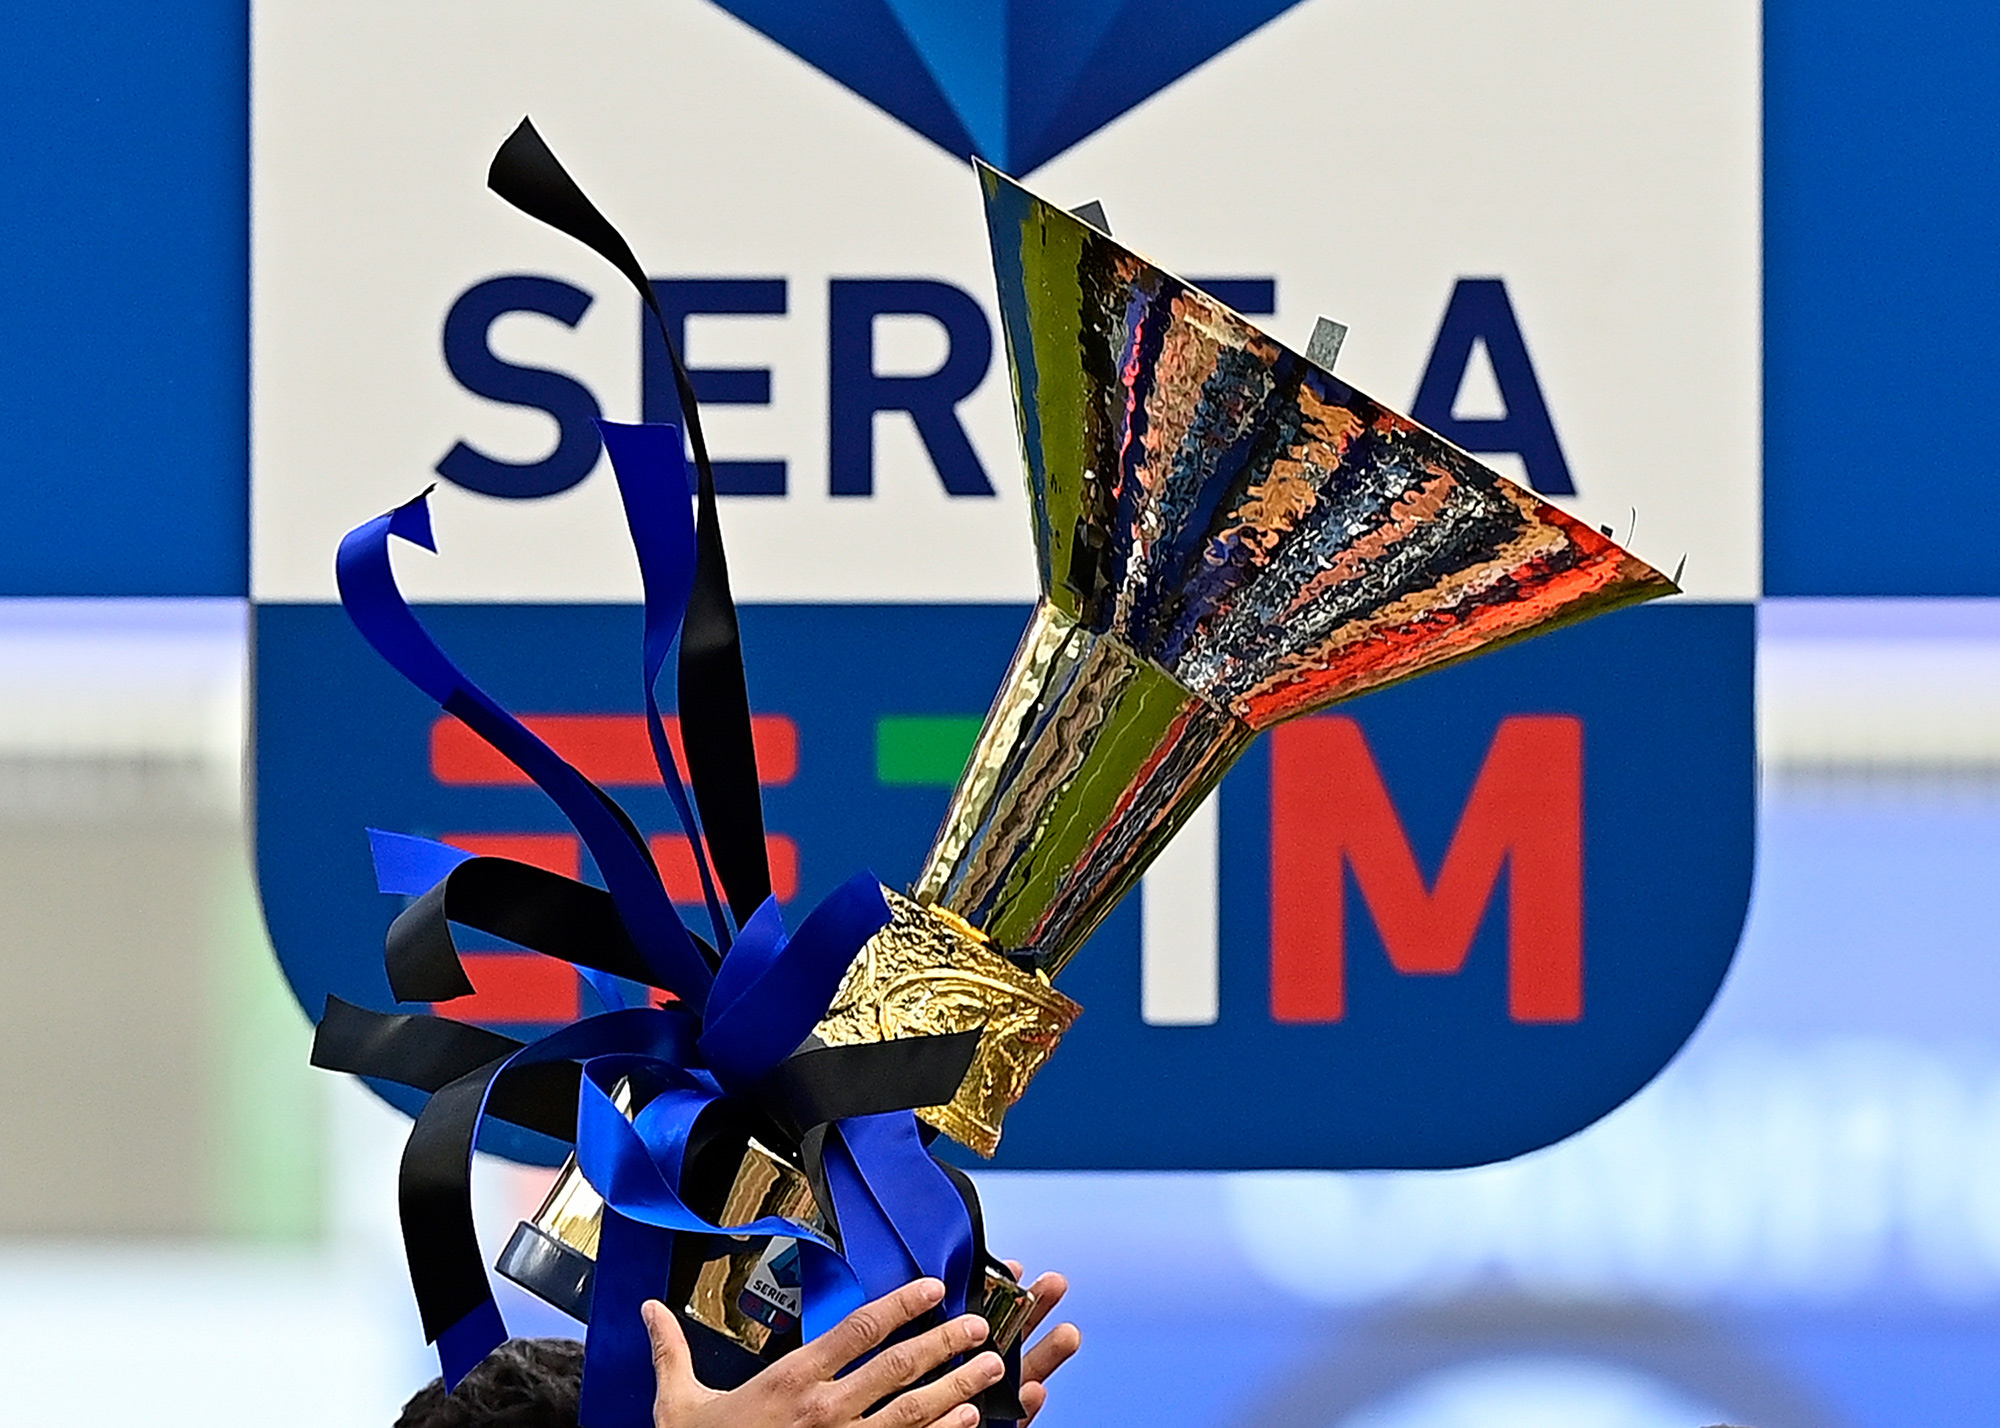 Serie A Week 1, preview and fixtures: Calcio is back! 